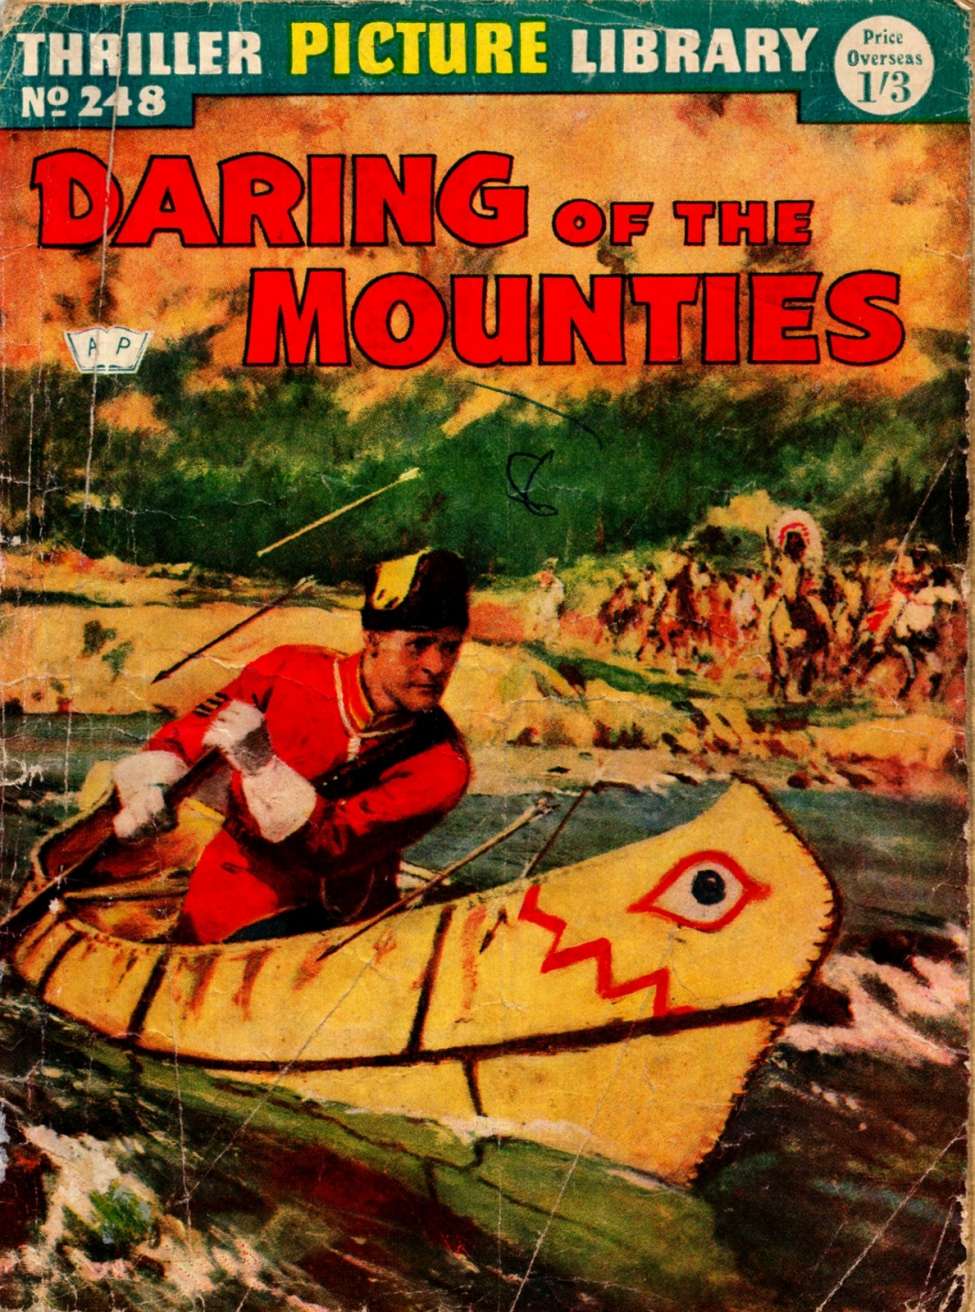 Book Cover For Thriller Picture Library 248 - Dick Daring of the Mounties